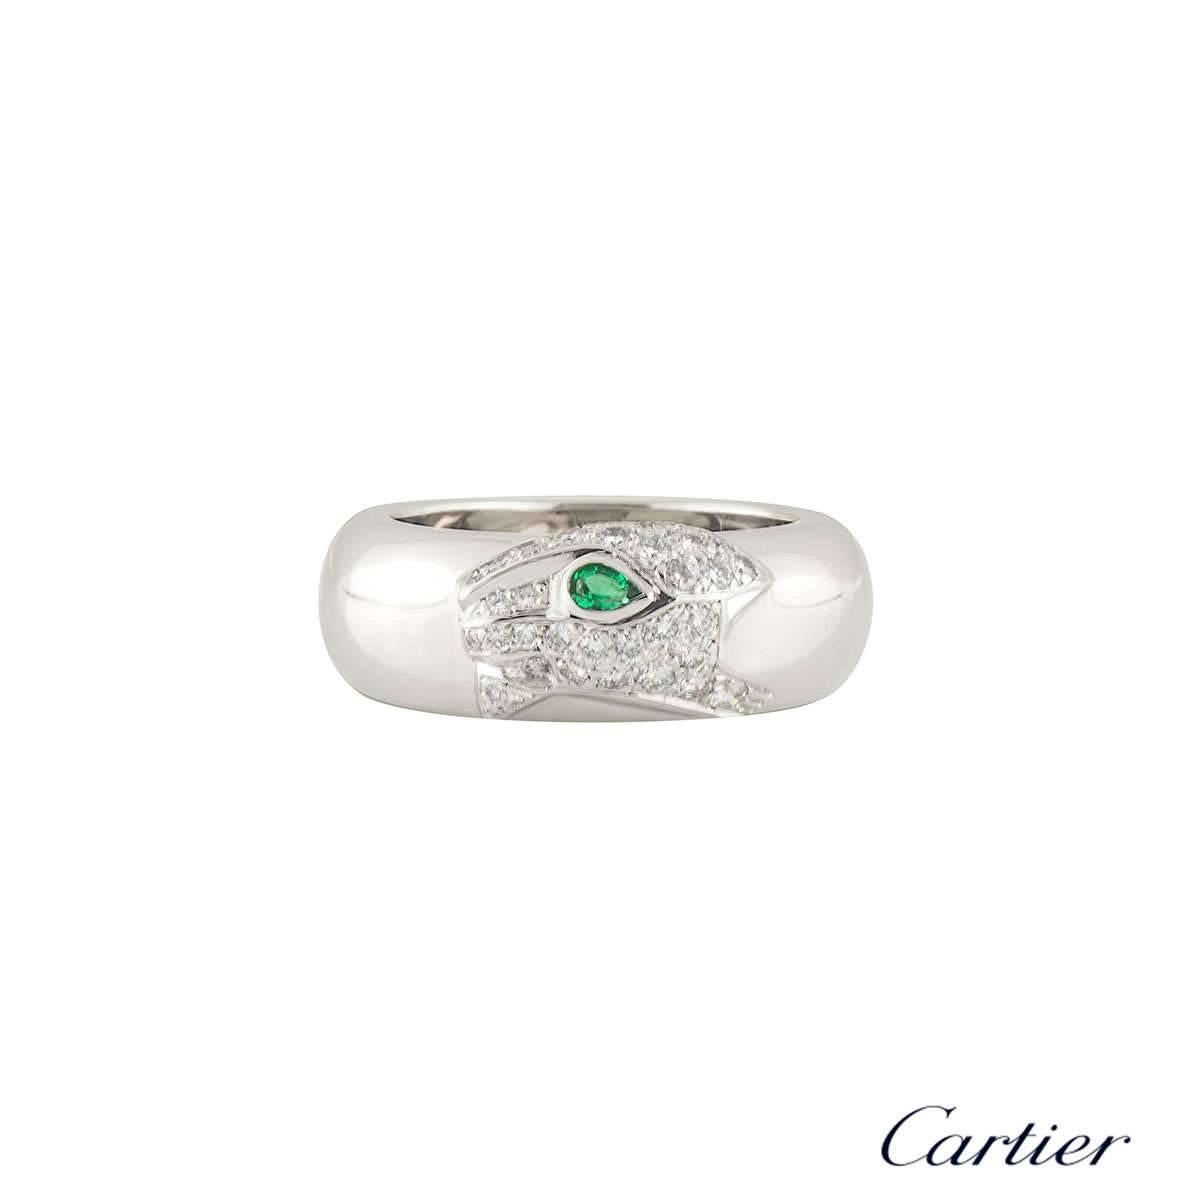 An 18k white gold diamond set ring from the Cartier Panthere collection. The ring is composed of the iconic Panthere head, of which is pave set with graduating round brilliant cut diamonds, leading on to the main body totalling approximately 0.47ct,